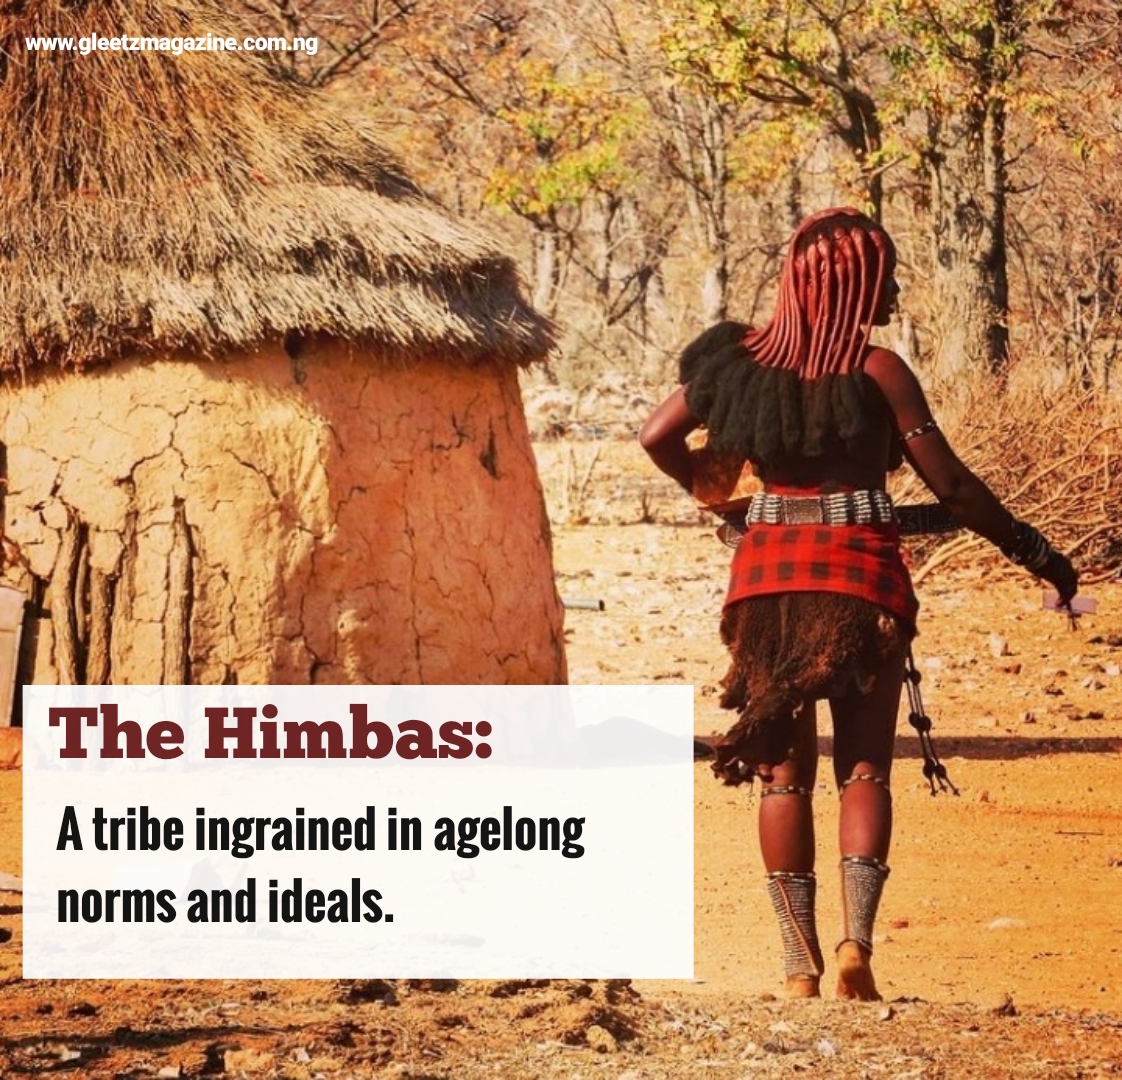 The Himba people: A tribe deeply ingrained in agelong norms and ideals